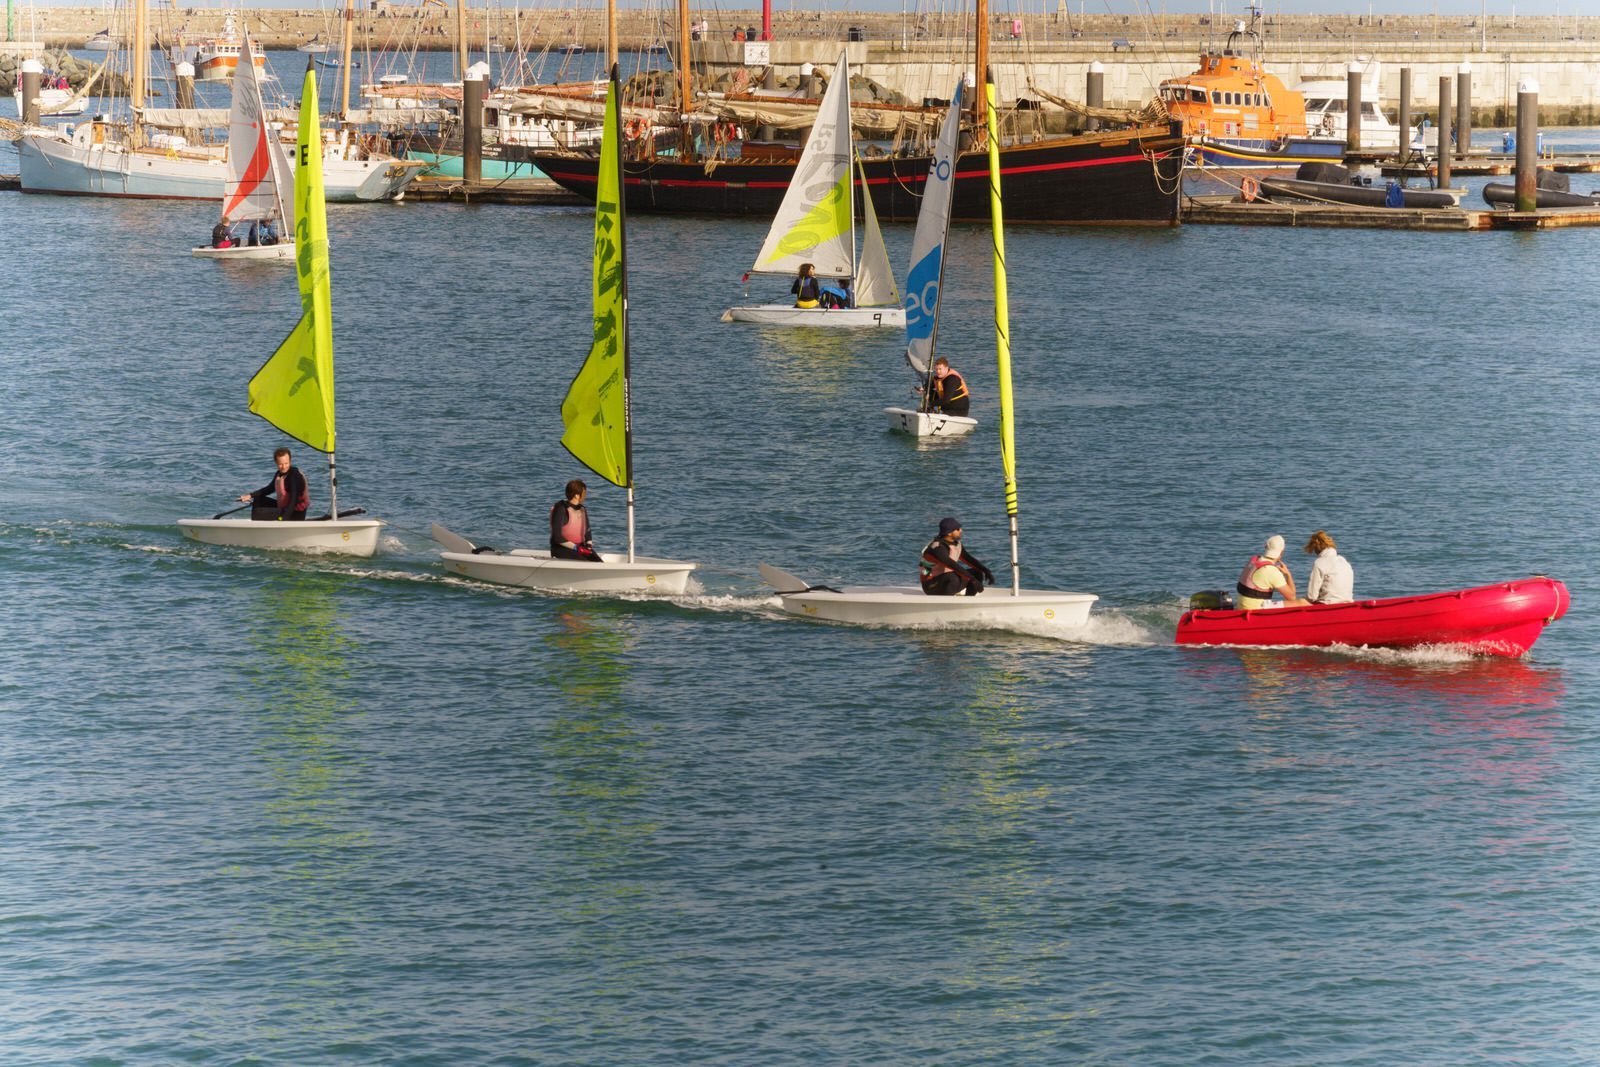 learning to sail, west pier, Dun Laoghaire,Irish National Sailing & Powerboat School,scenic venue,many amenities,Ireland, William Murphy, Sony, A7RIV, 70-20mm lens, 004